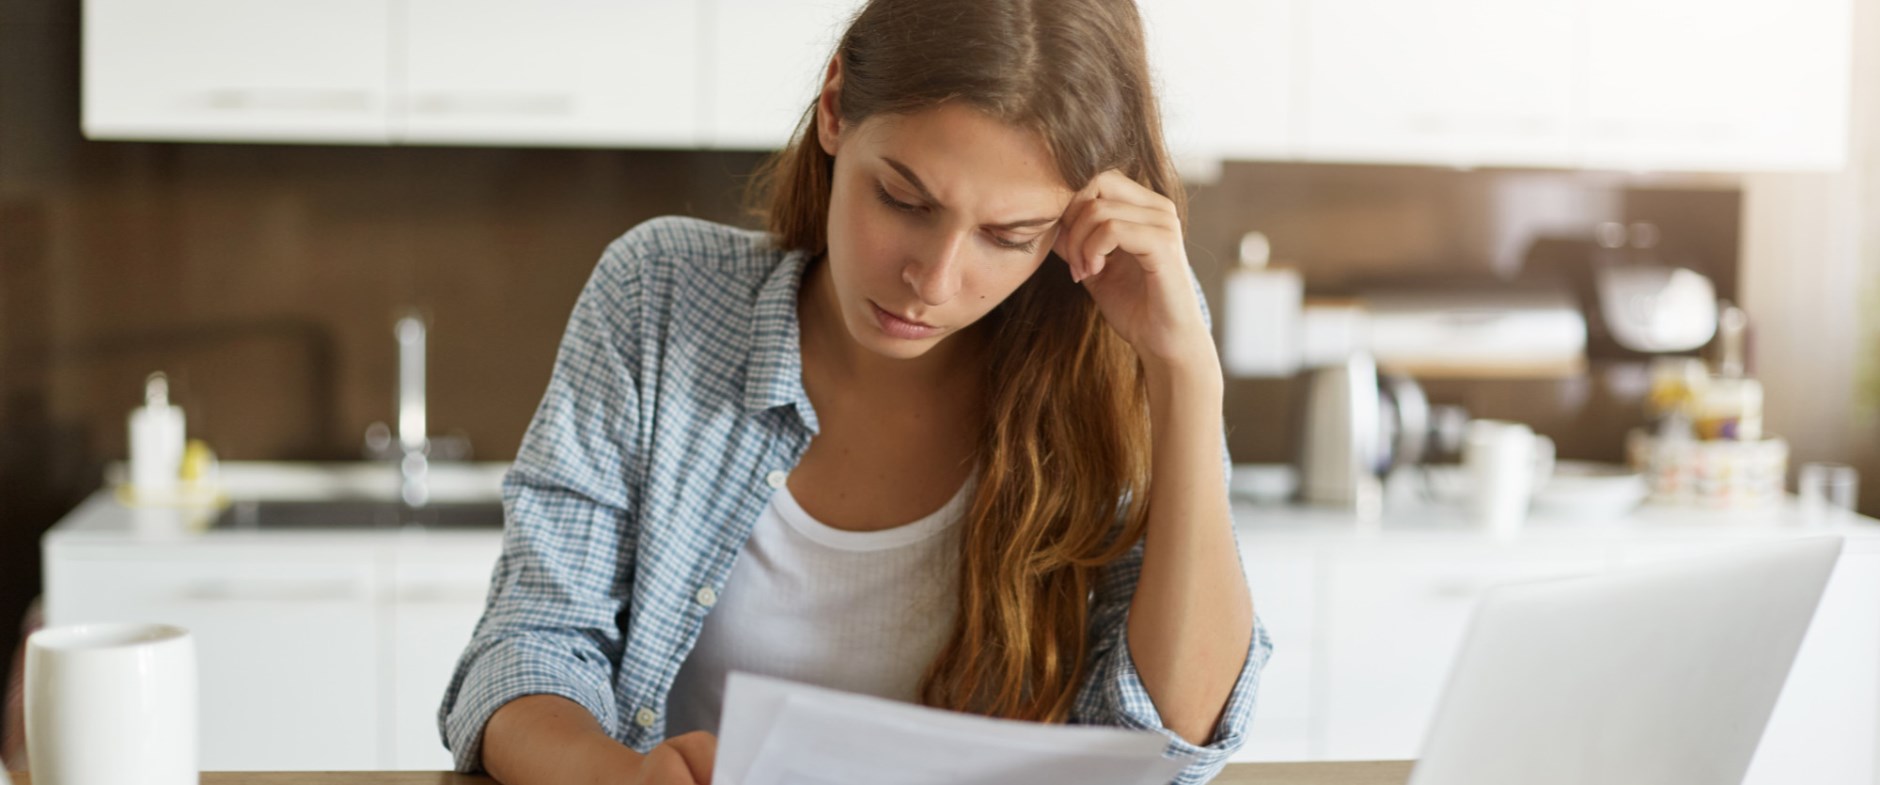 A women reading over documents - Meredith Law Firm, LLC - Chapter 13 Bankruptcy Lawyers - North Charleston, SC